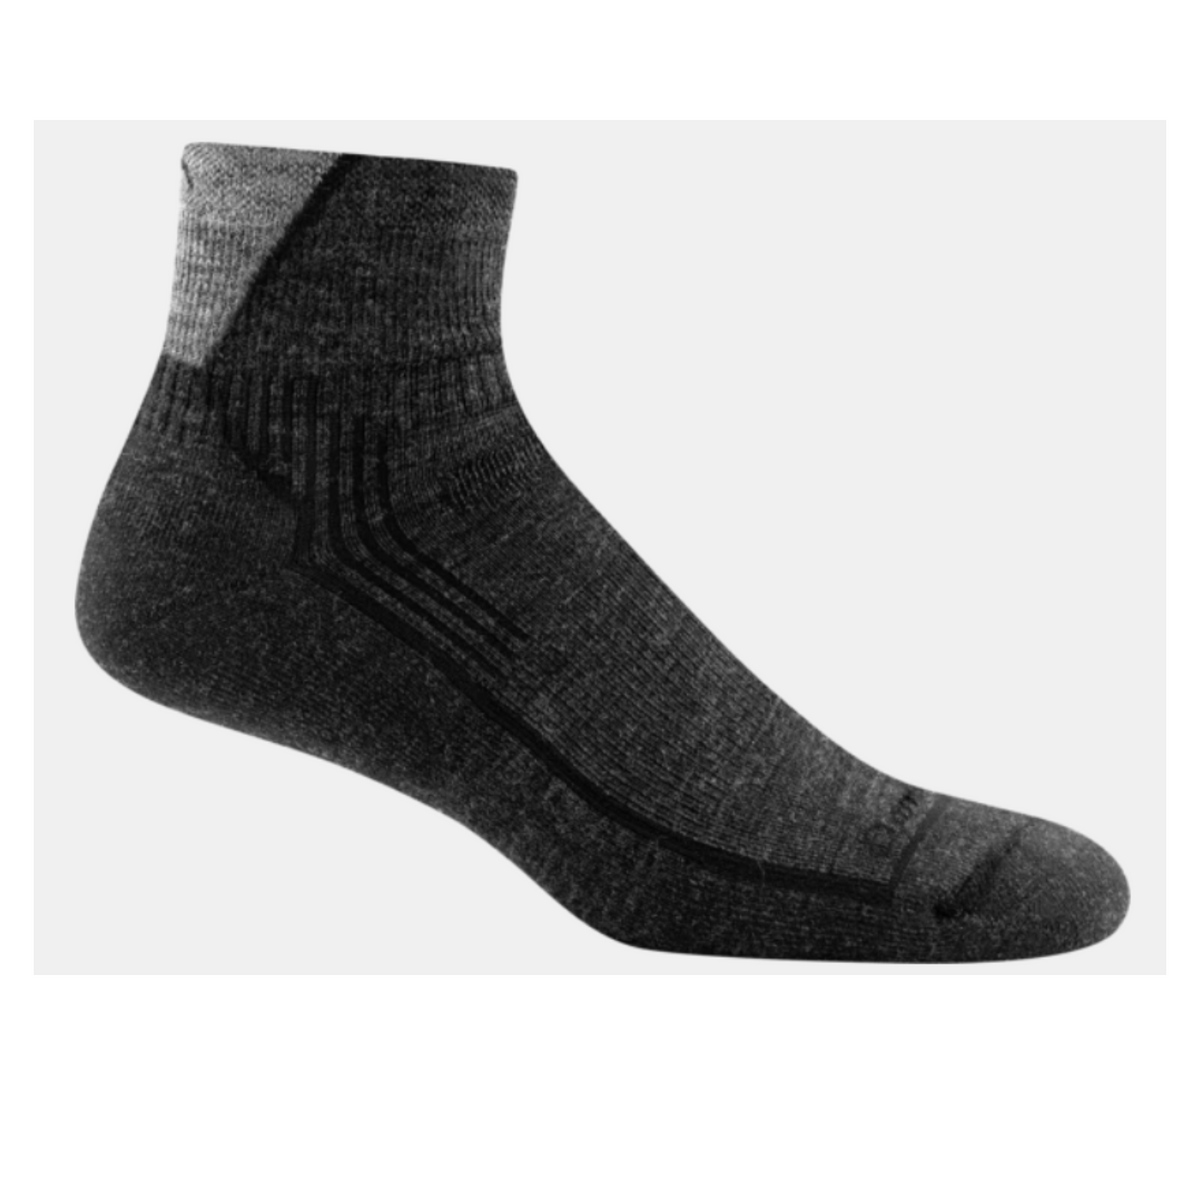 Darn Tough 1959 Quarter Height Midweight with Cushion Hike Men&#39;s Sock in black on display from side